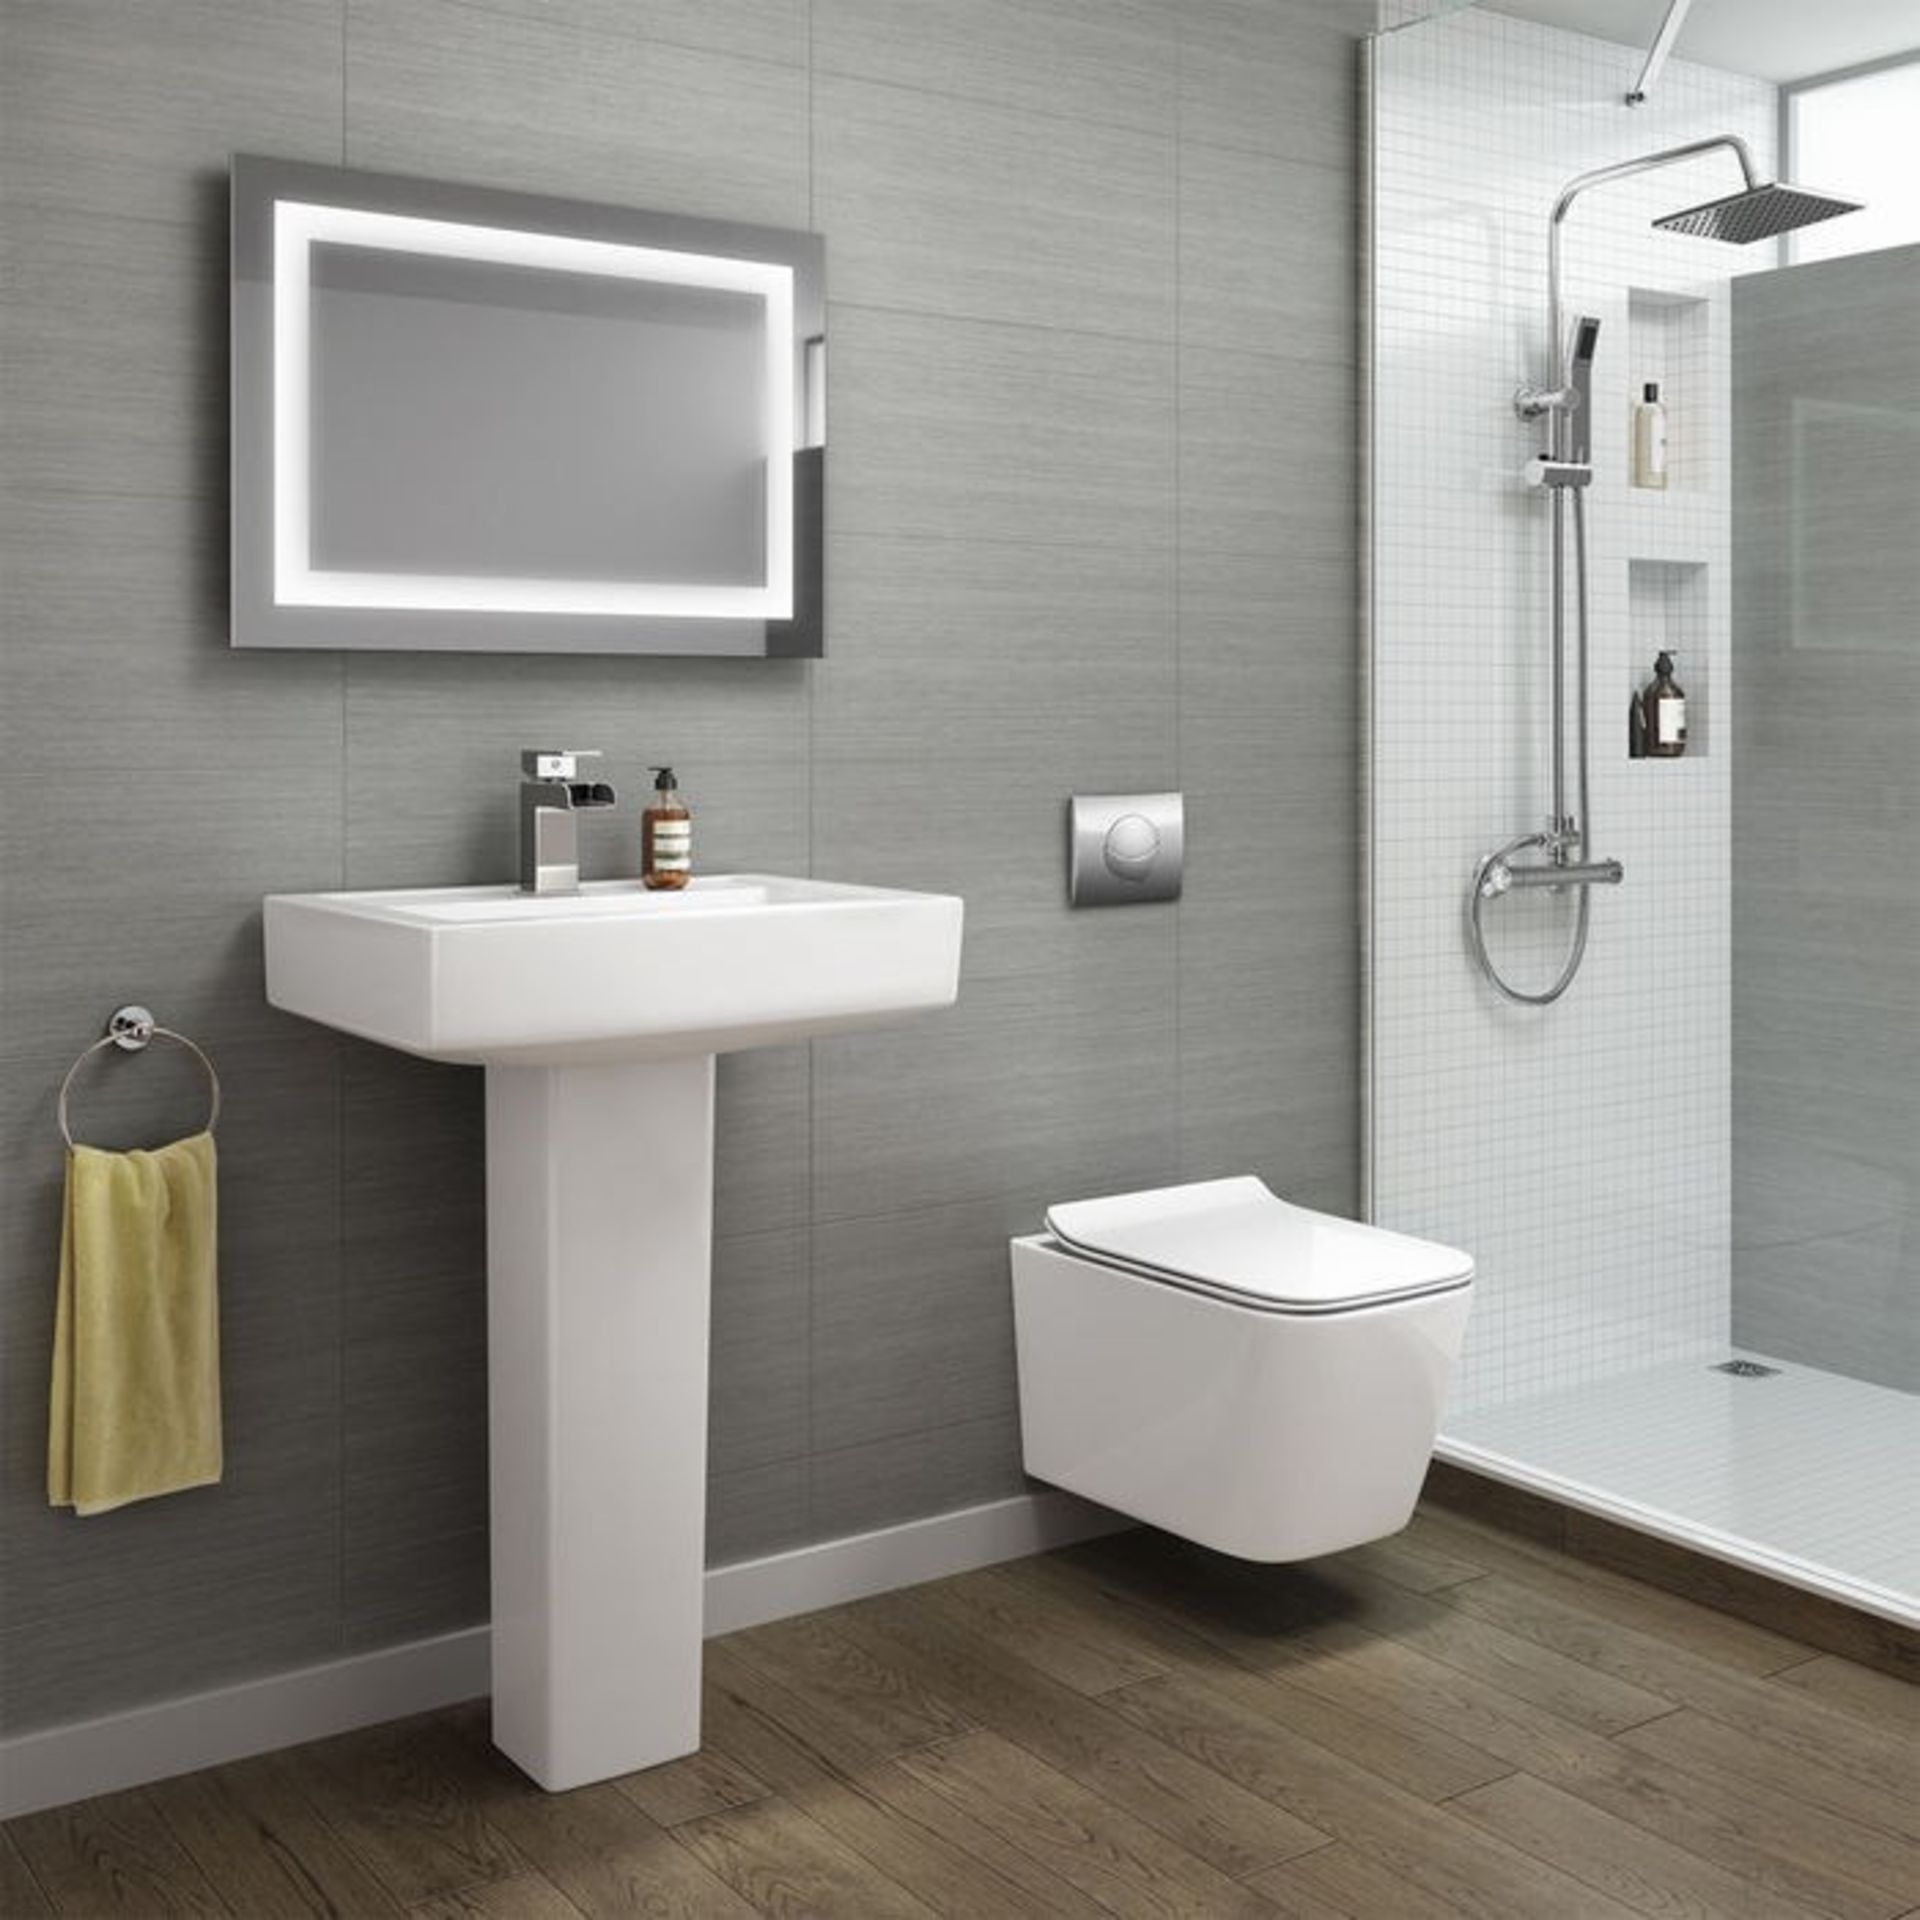 BRAND NEW BOXED Florence Wall Hung Toilet inc Luxury Soft Close Seat.RRP £349.99.Made from White - Image 2 of 2